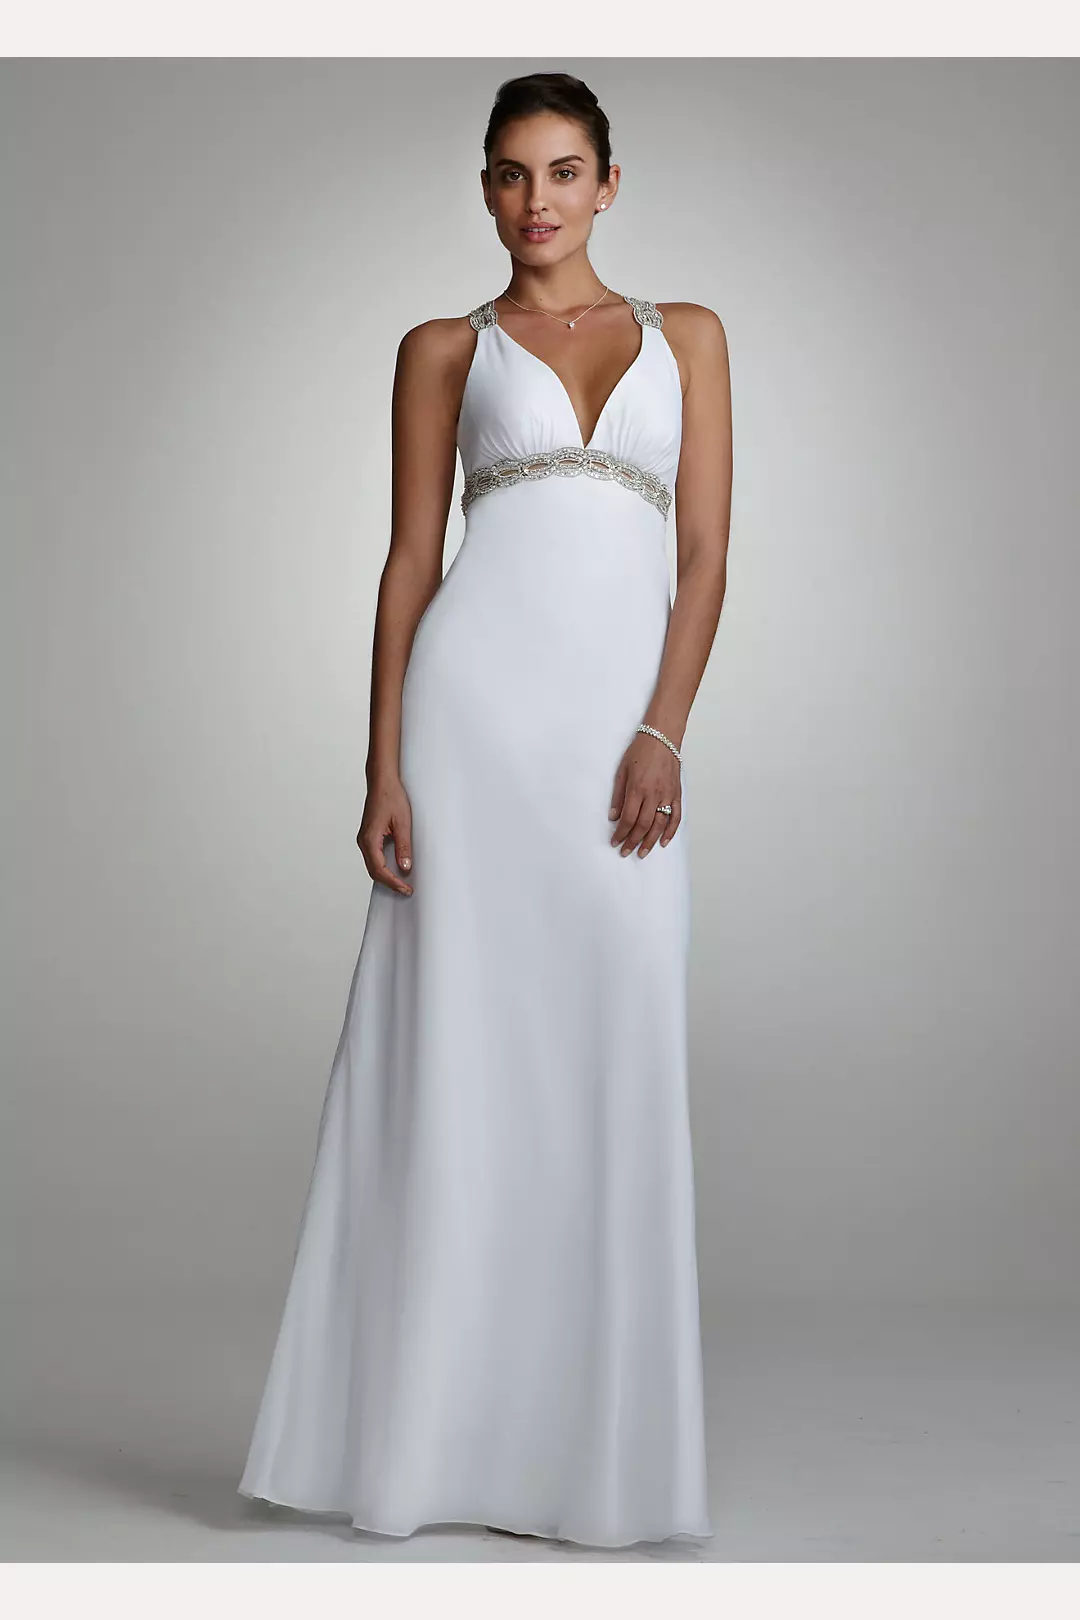 Beaded Tank Gown with Back Detailing | David's Bridal